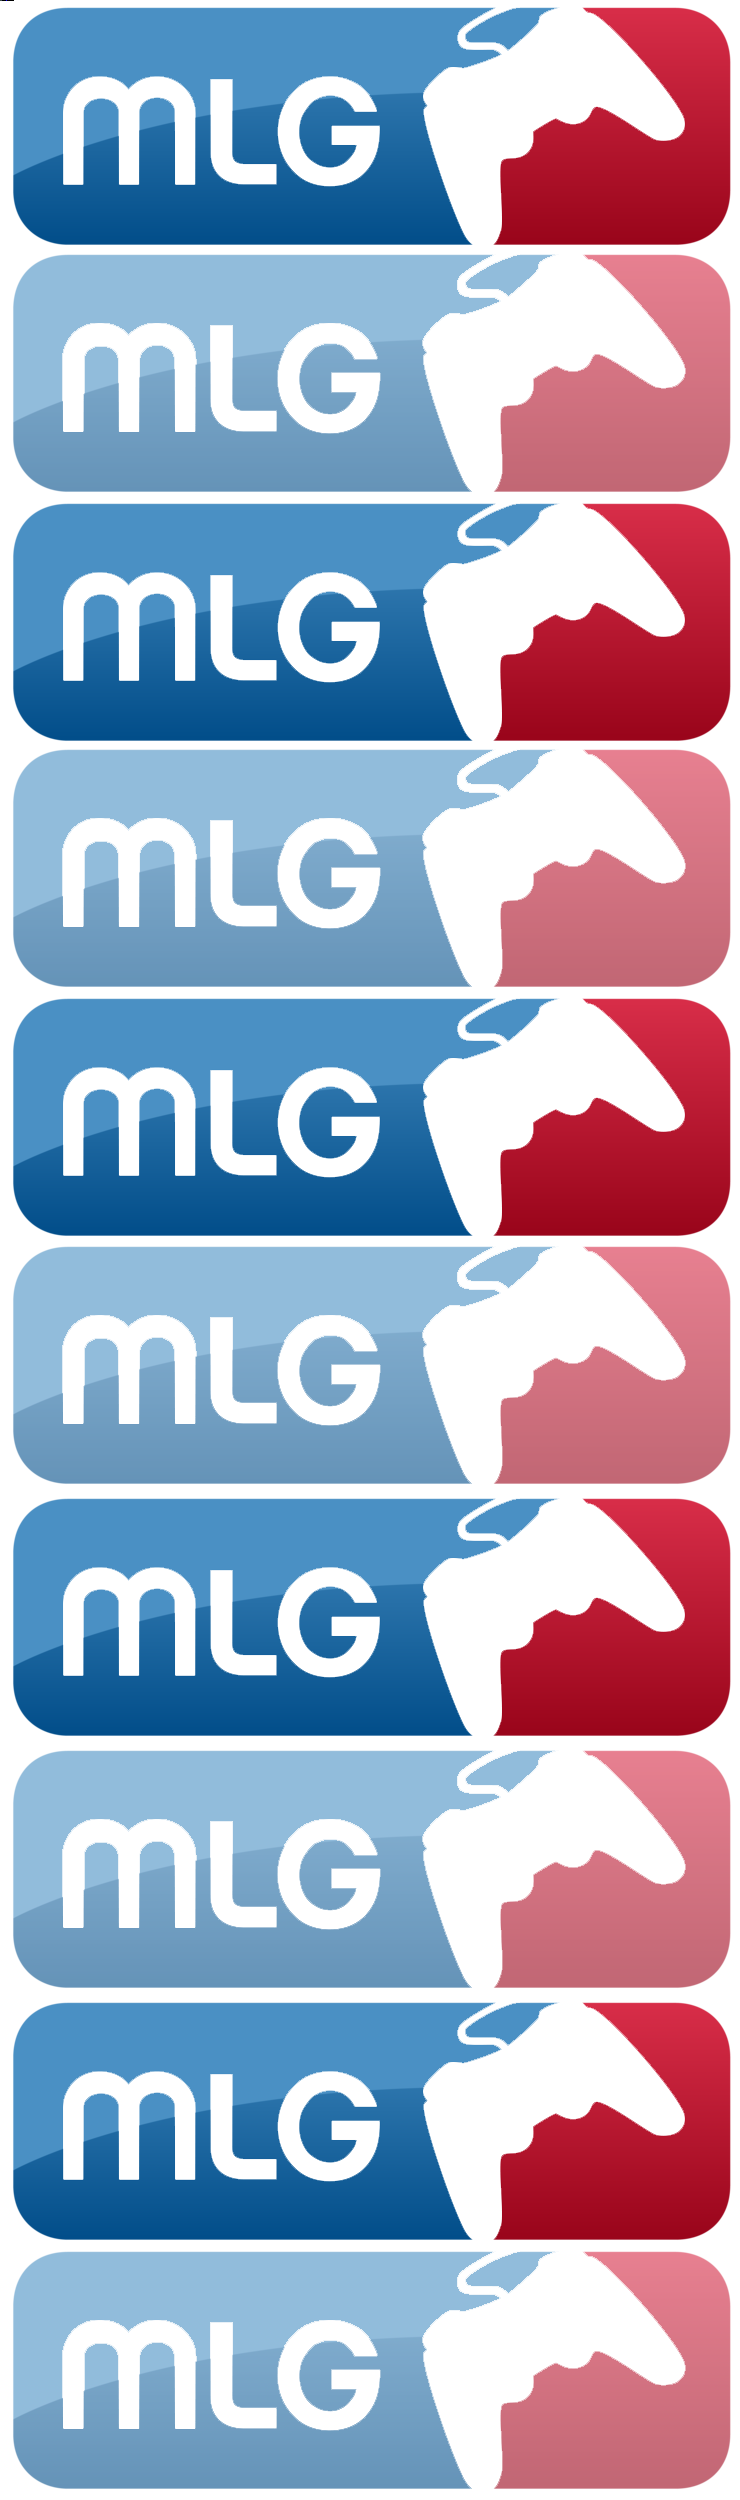 mlg clear.png